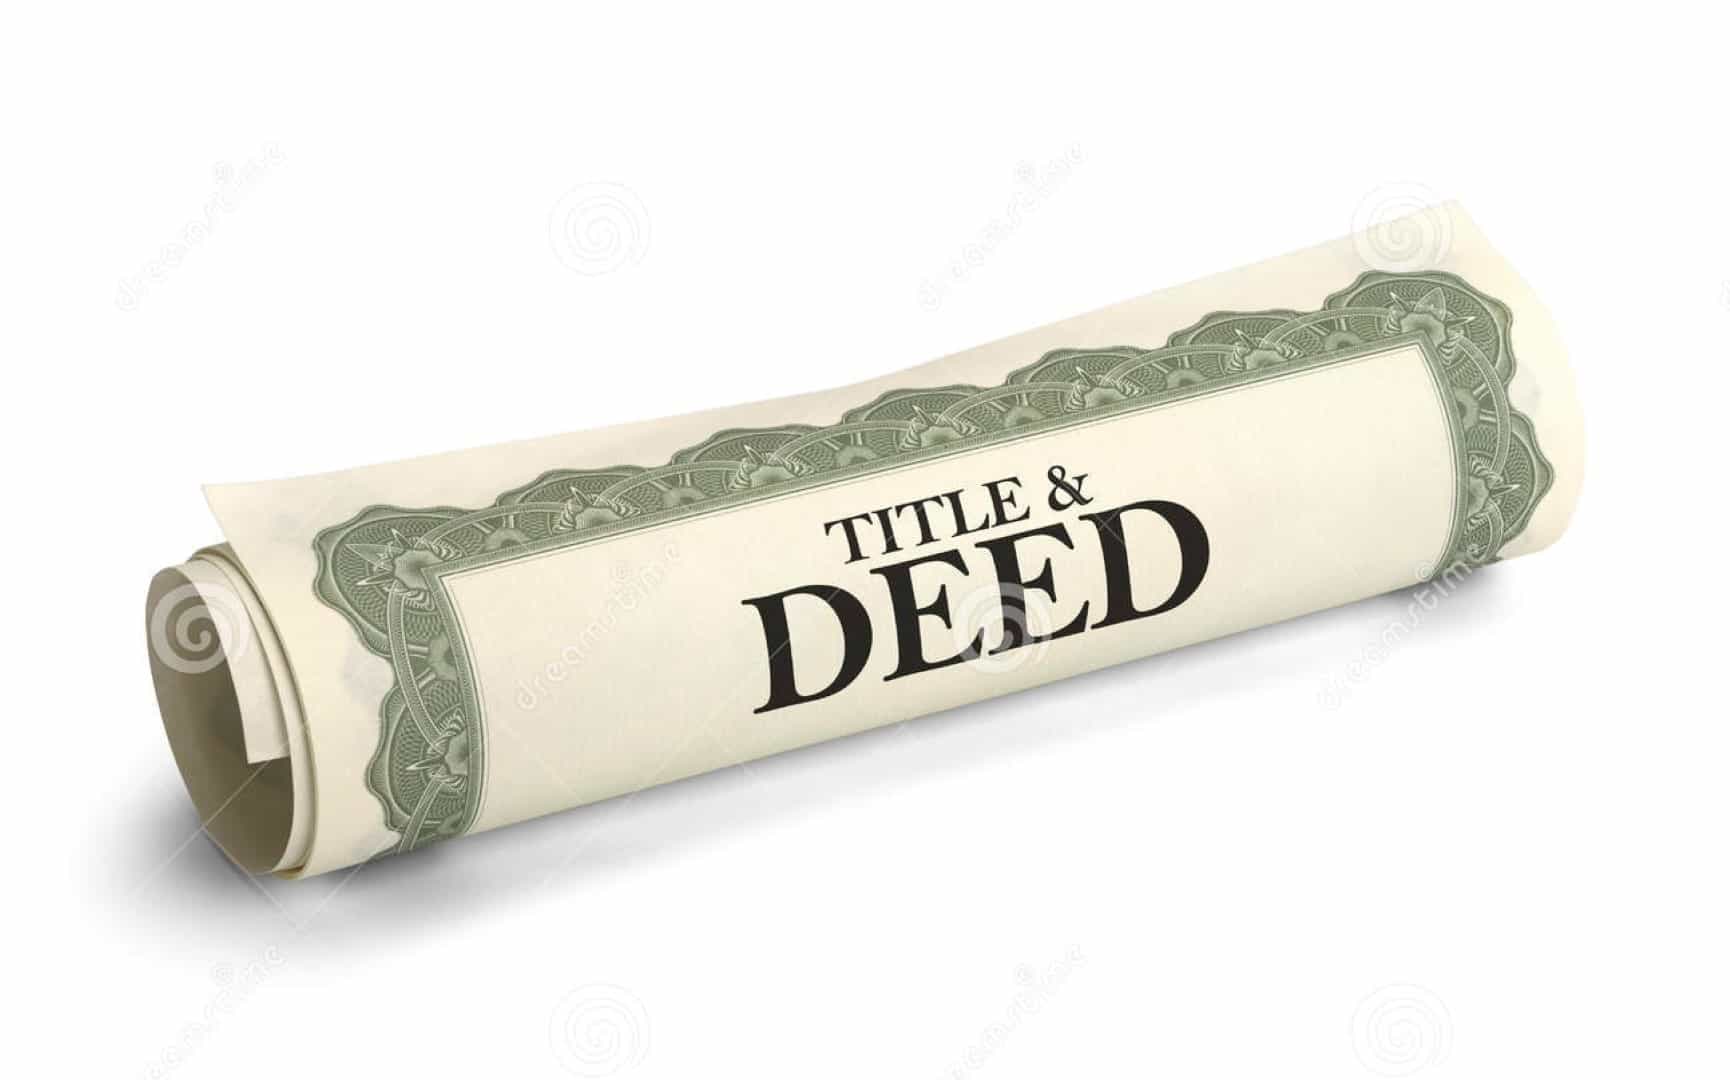 title-deed-paper-document-rolled-isolated-white-background-41043141-1.jpg